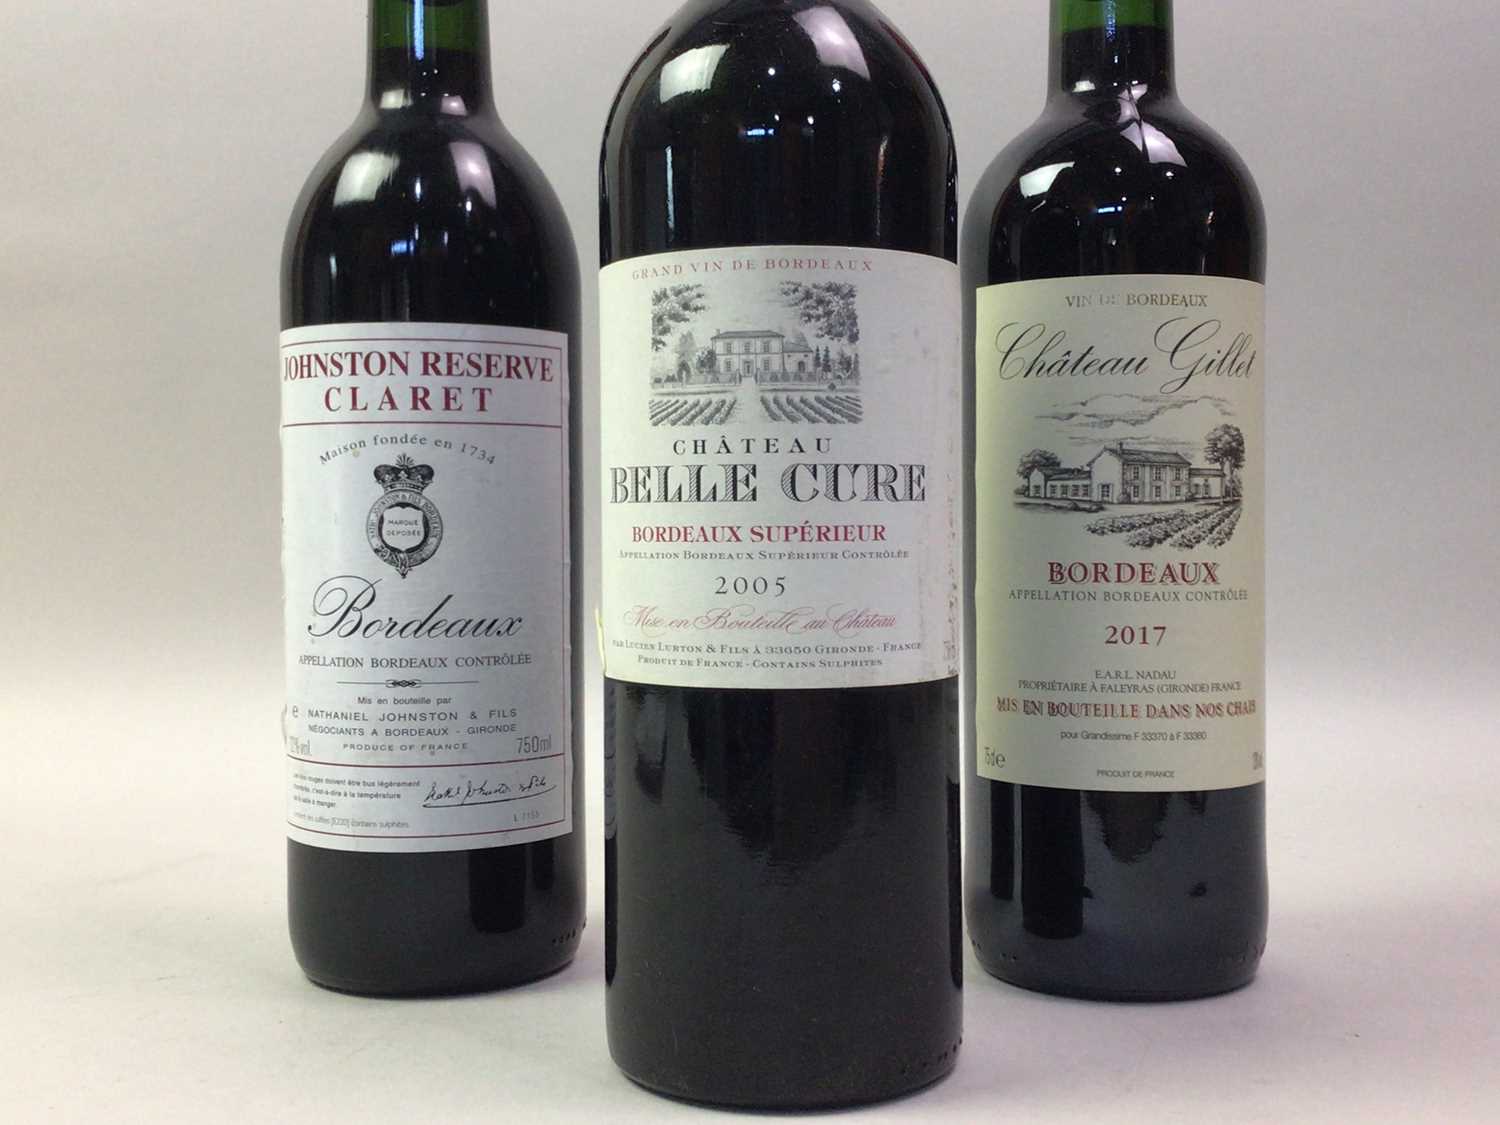 COLLECTION OF SEVEN FRENCH BORDEAUX RED WINES, INCLUDING CHATEAU GRAND FERRAND 2006 BORDEAUX SUPERI